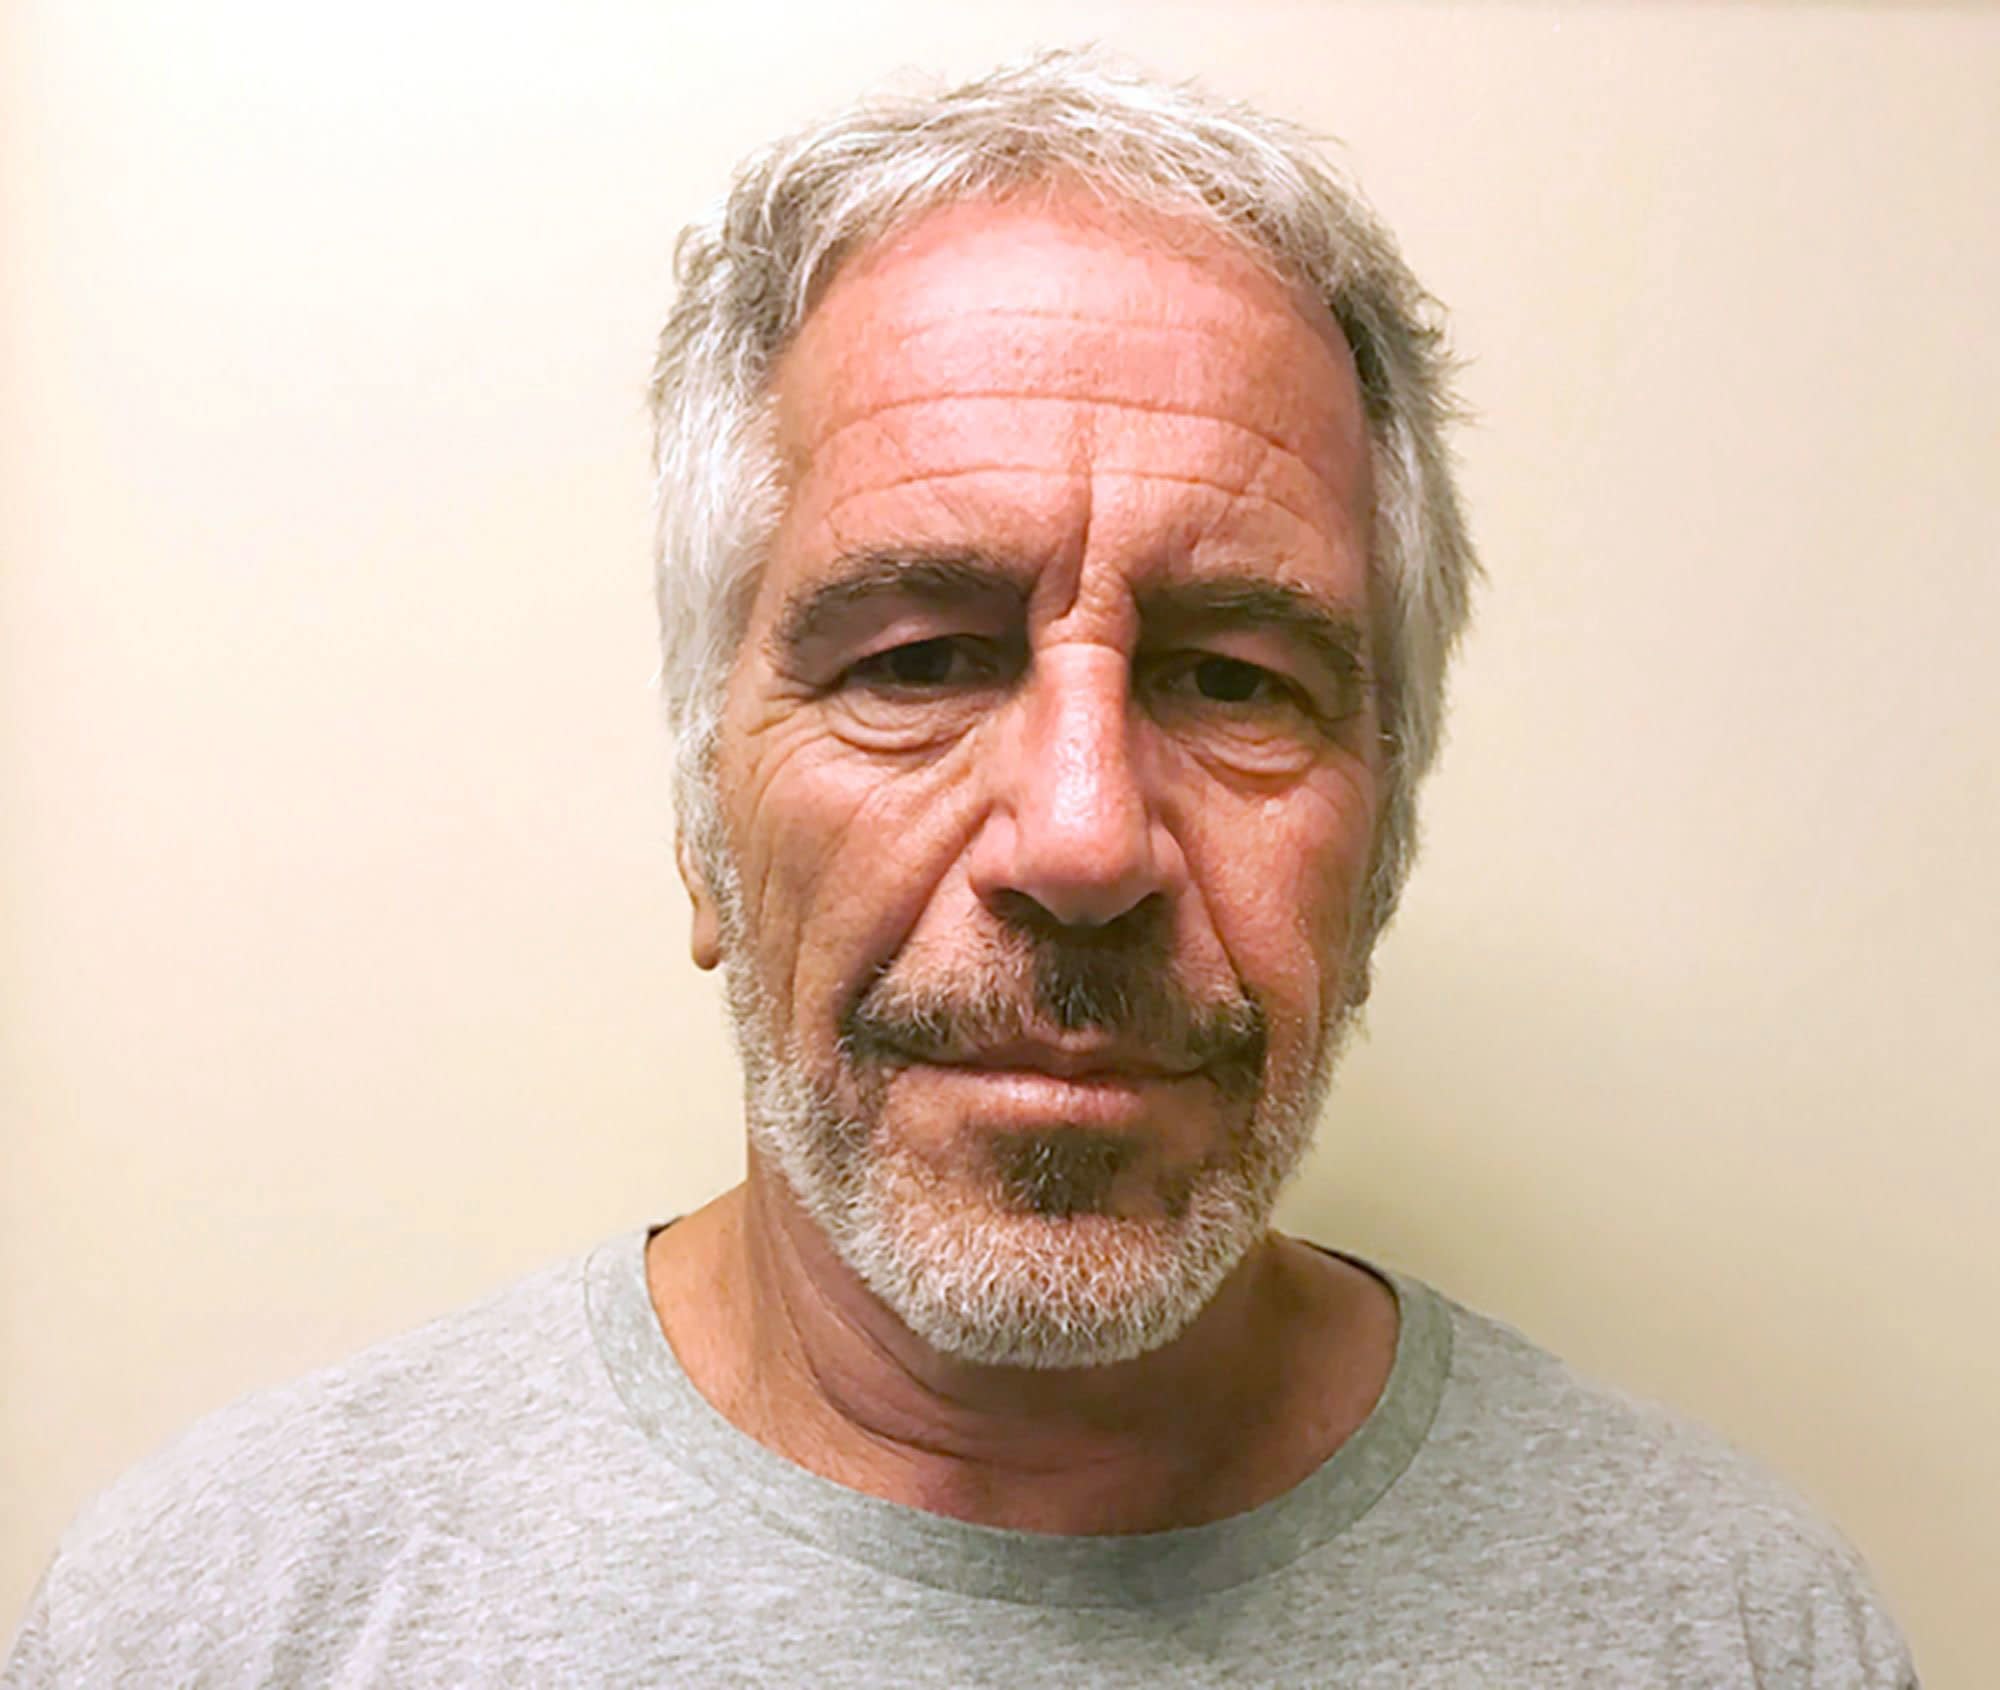 Famed Forensic Pathologist Dr. Michael Baden Says Jeffrey Epstein's Death 'Points to Homicide'